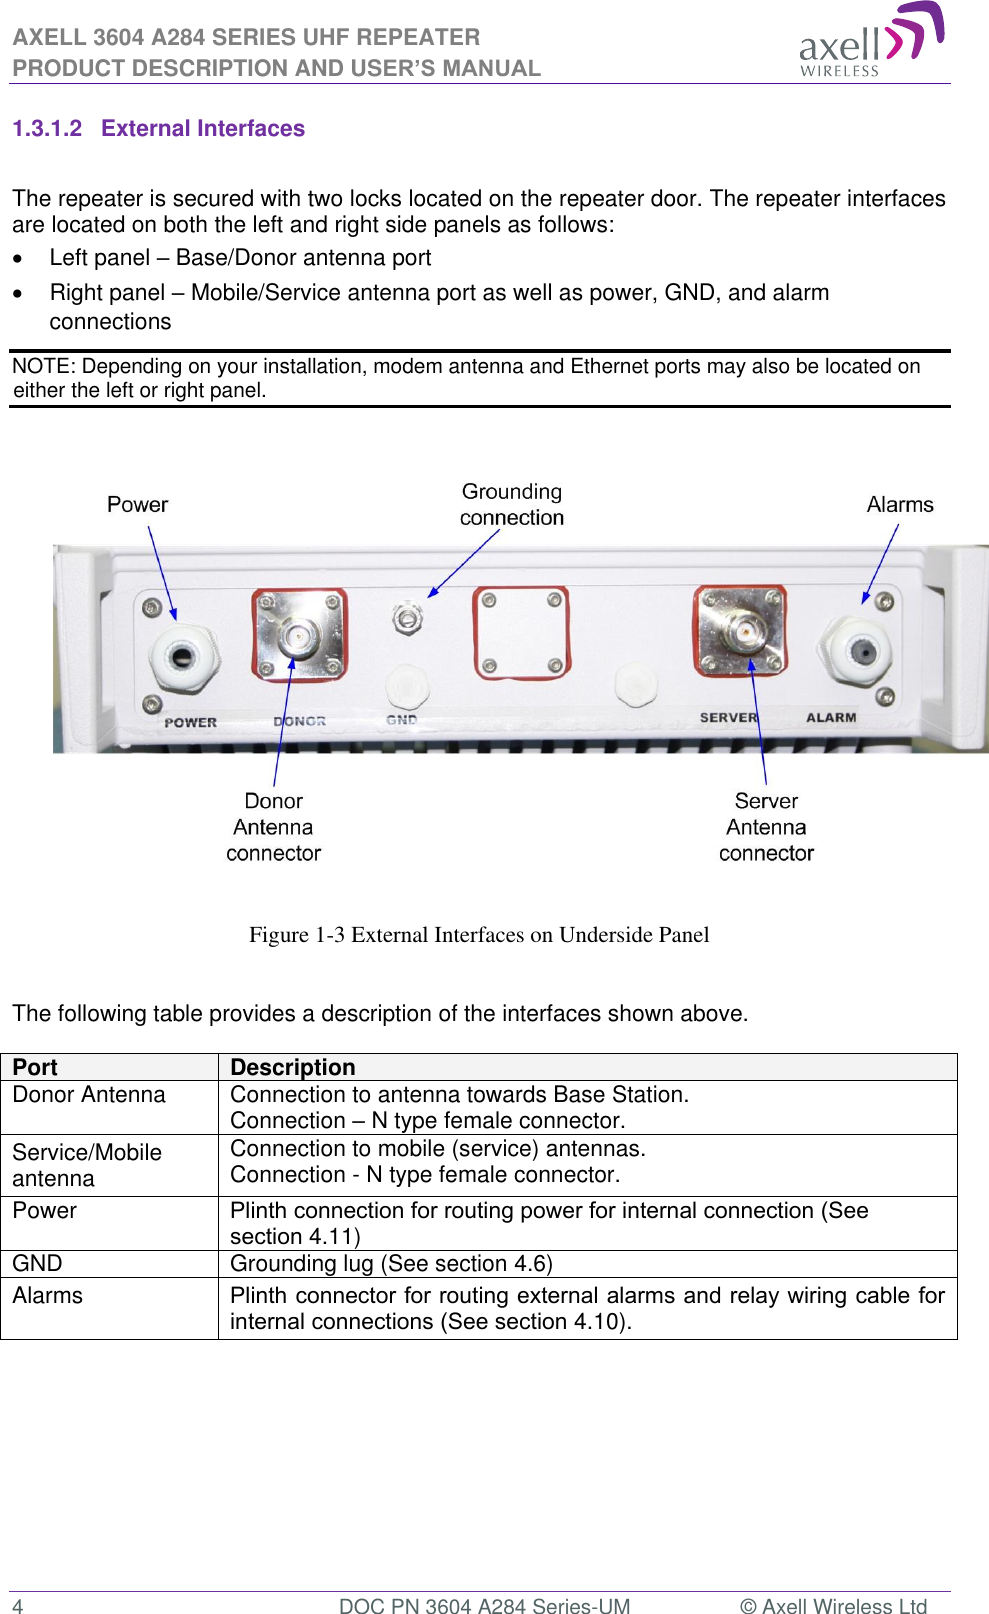 AXELL 3604 A284 SERIES UHF REPEATER PRODUCT DESCRIPTION AND USER’S MANUAL  4  DOC PN 3604 A284 Series-UM  © Axell Wireless Ltd  1.3.1.2  External Interfaces  The repeater is secured with two locks located on the repeater door. The repeater interfaces are located on both the left and right side panels as follows:  Left panel  Base/Donor antenna port   Right panel  Mobile/Service antenna port as well as power, GND, and alarm connections NOTE: Depending on your installation, modem antenna and Ethernet ports may also be located on either the left or right panel.                    Figure 1-3 External Interfaces on Underside Panel   The following table provides a description of the interfaces shown above.  Port Description Donor Antenna Connection to antenna towards Base Station. Connection  N type female connector. Service/Mobile antenna Connection to mobile (service) antennas. Connection - N type female connector. Power 4.11) GND Grounding lug (See section 4.6) Alarms  4.10).             